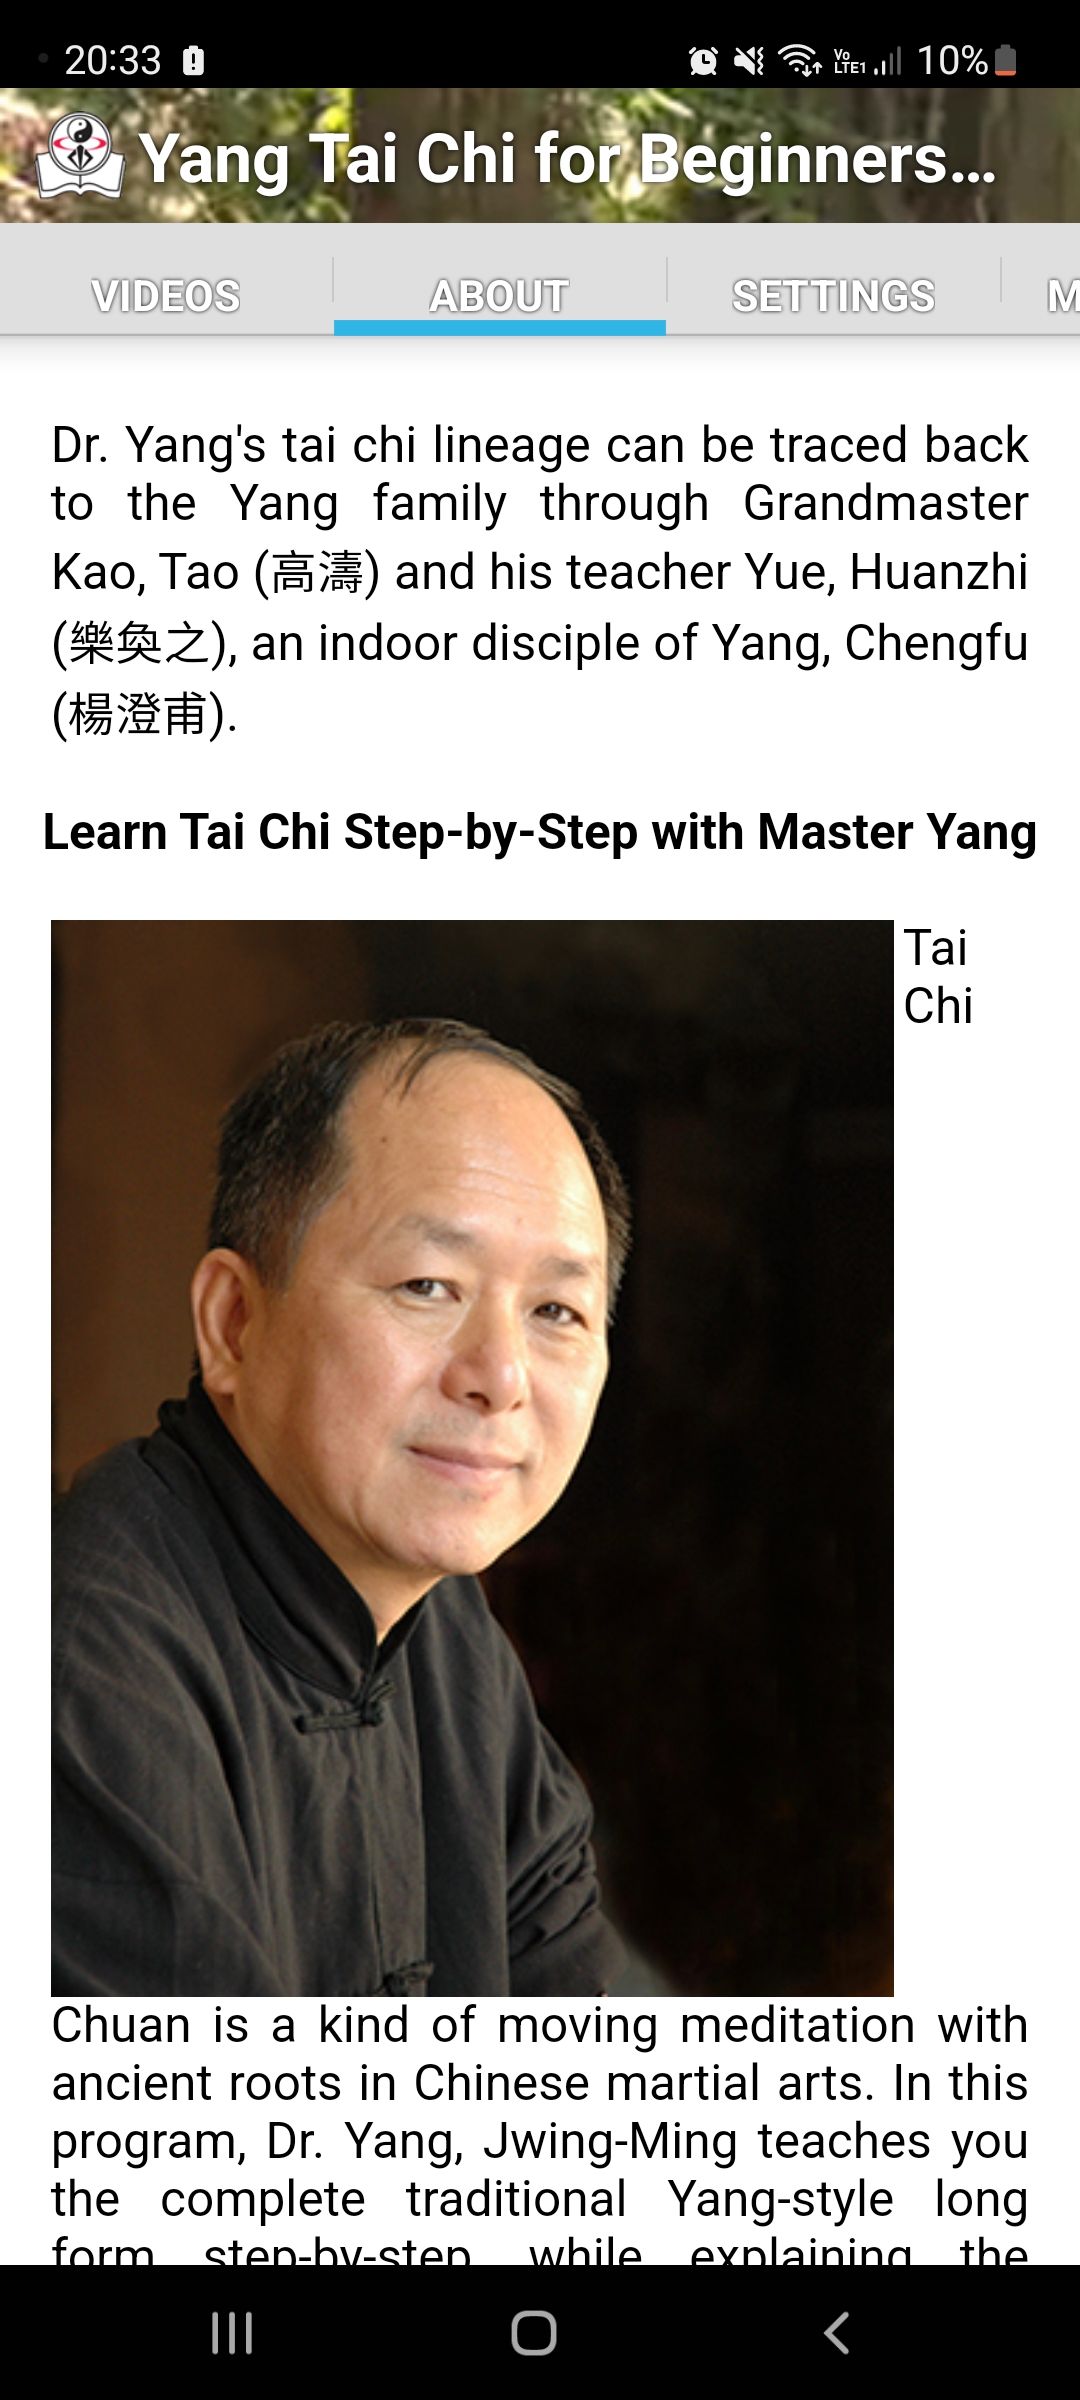 Yang Tai Chi for Beginners mobile app about master yang